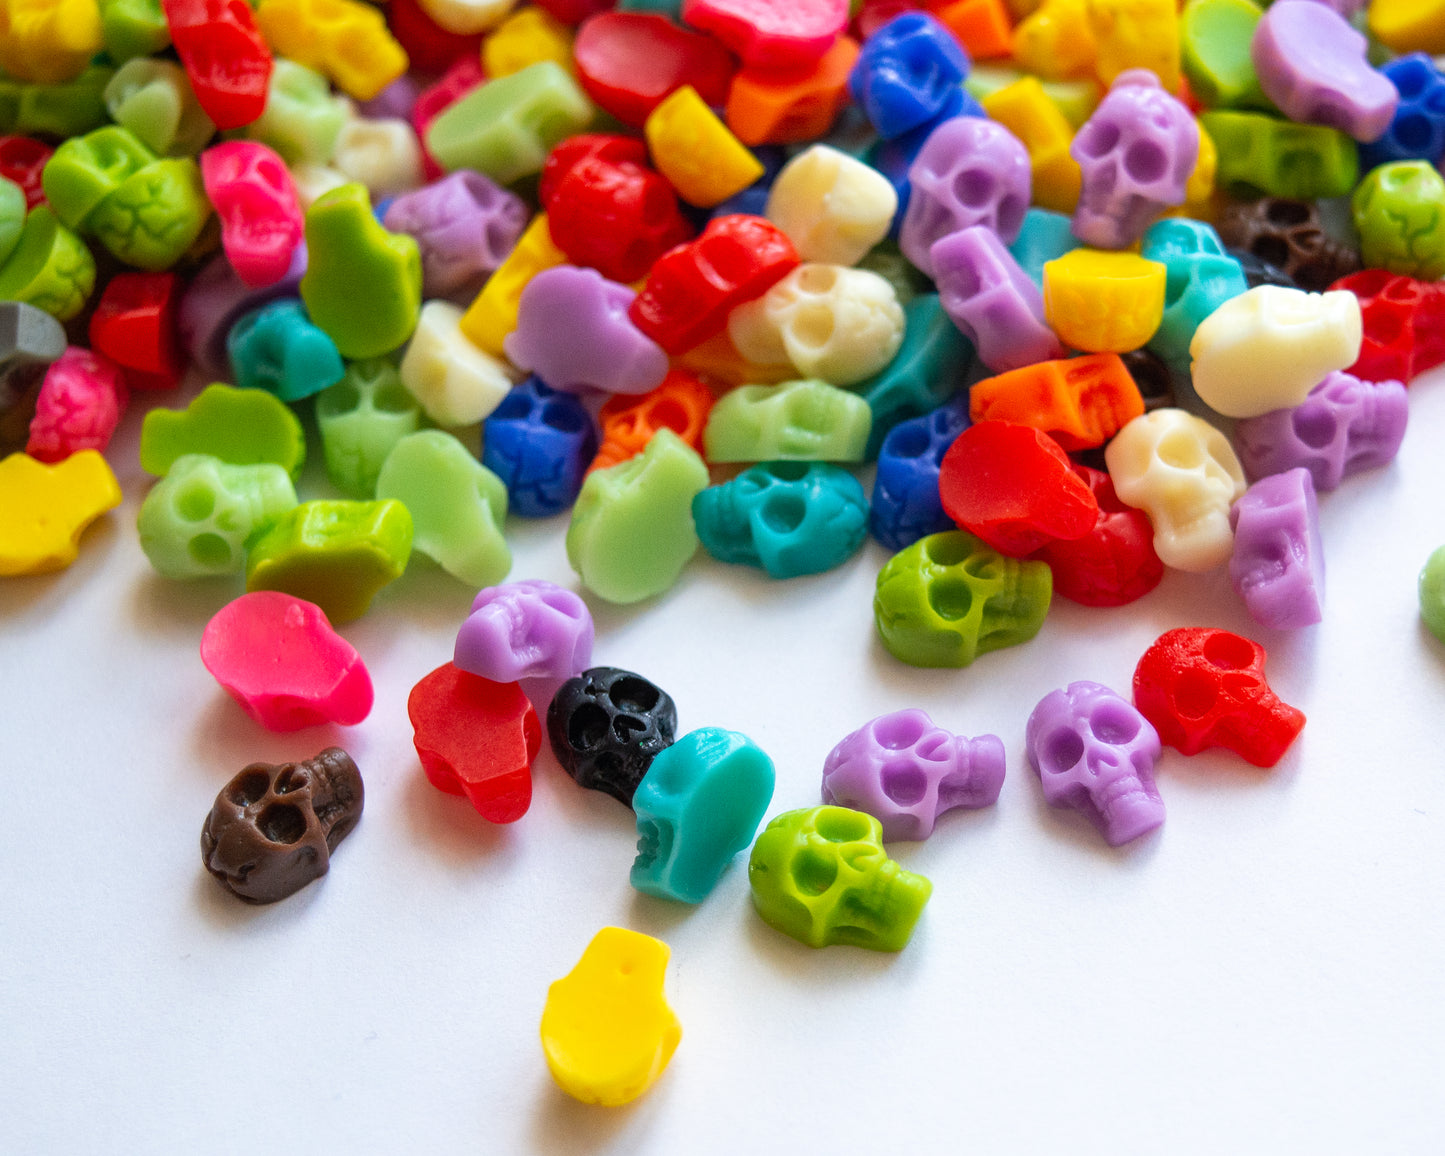 11mm x 8mm Skull Cabochons, Undrilled Resin Flatbacks in Mixed Colors